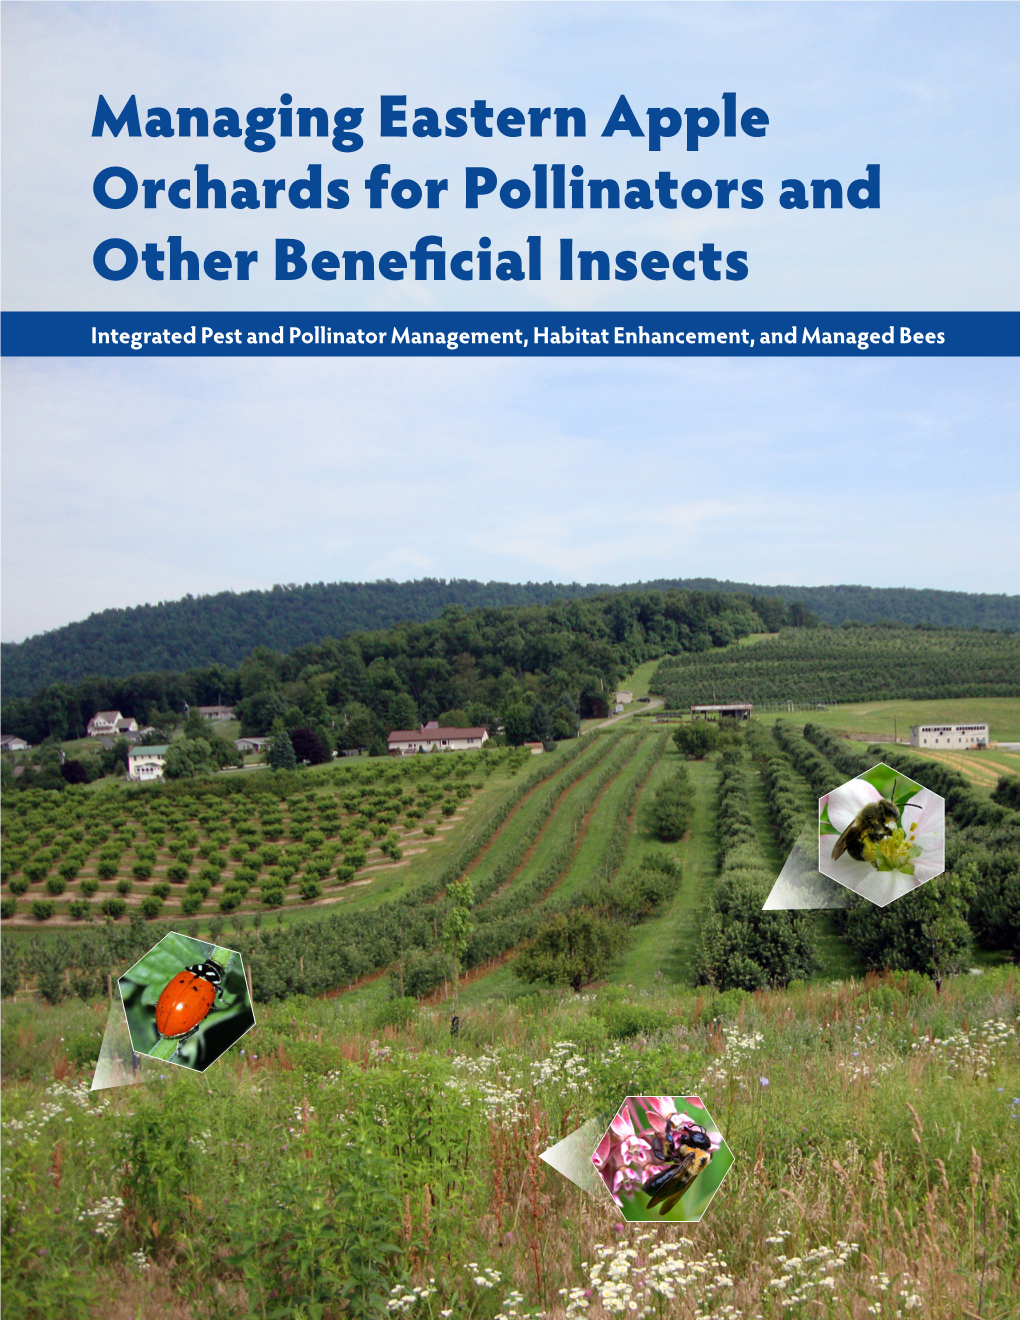 Managing Eastern Apple Orchards for Pollinators and Other Beneficial Insects